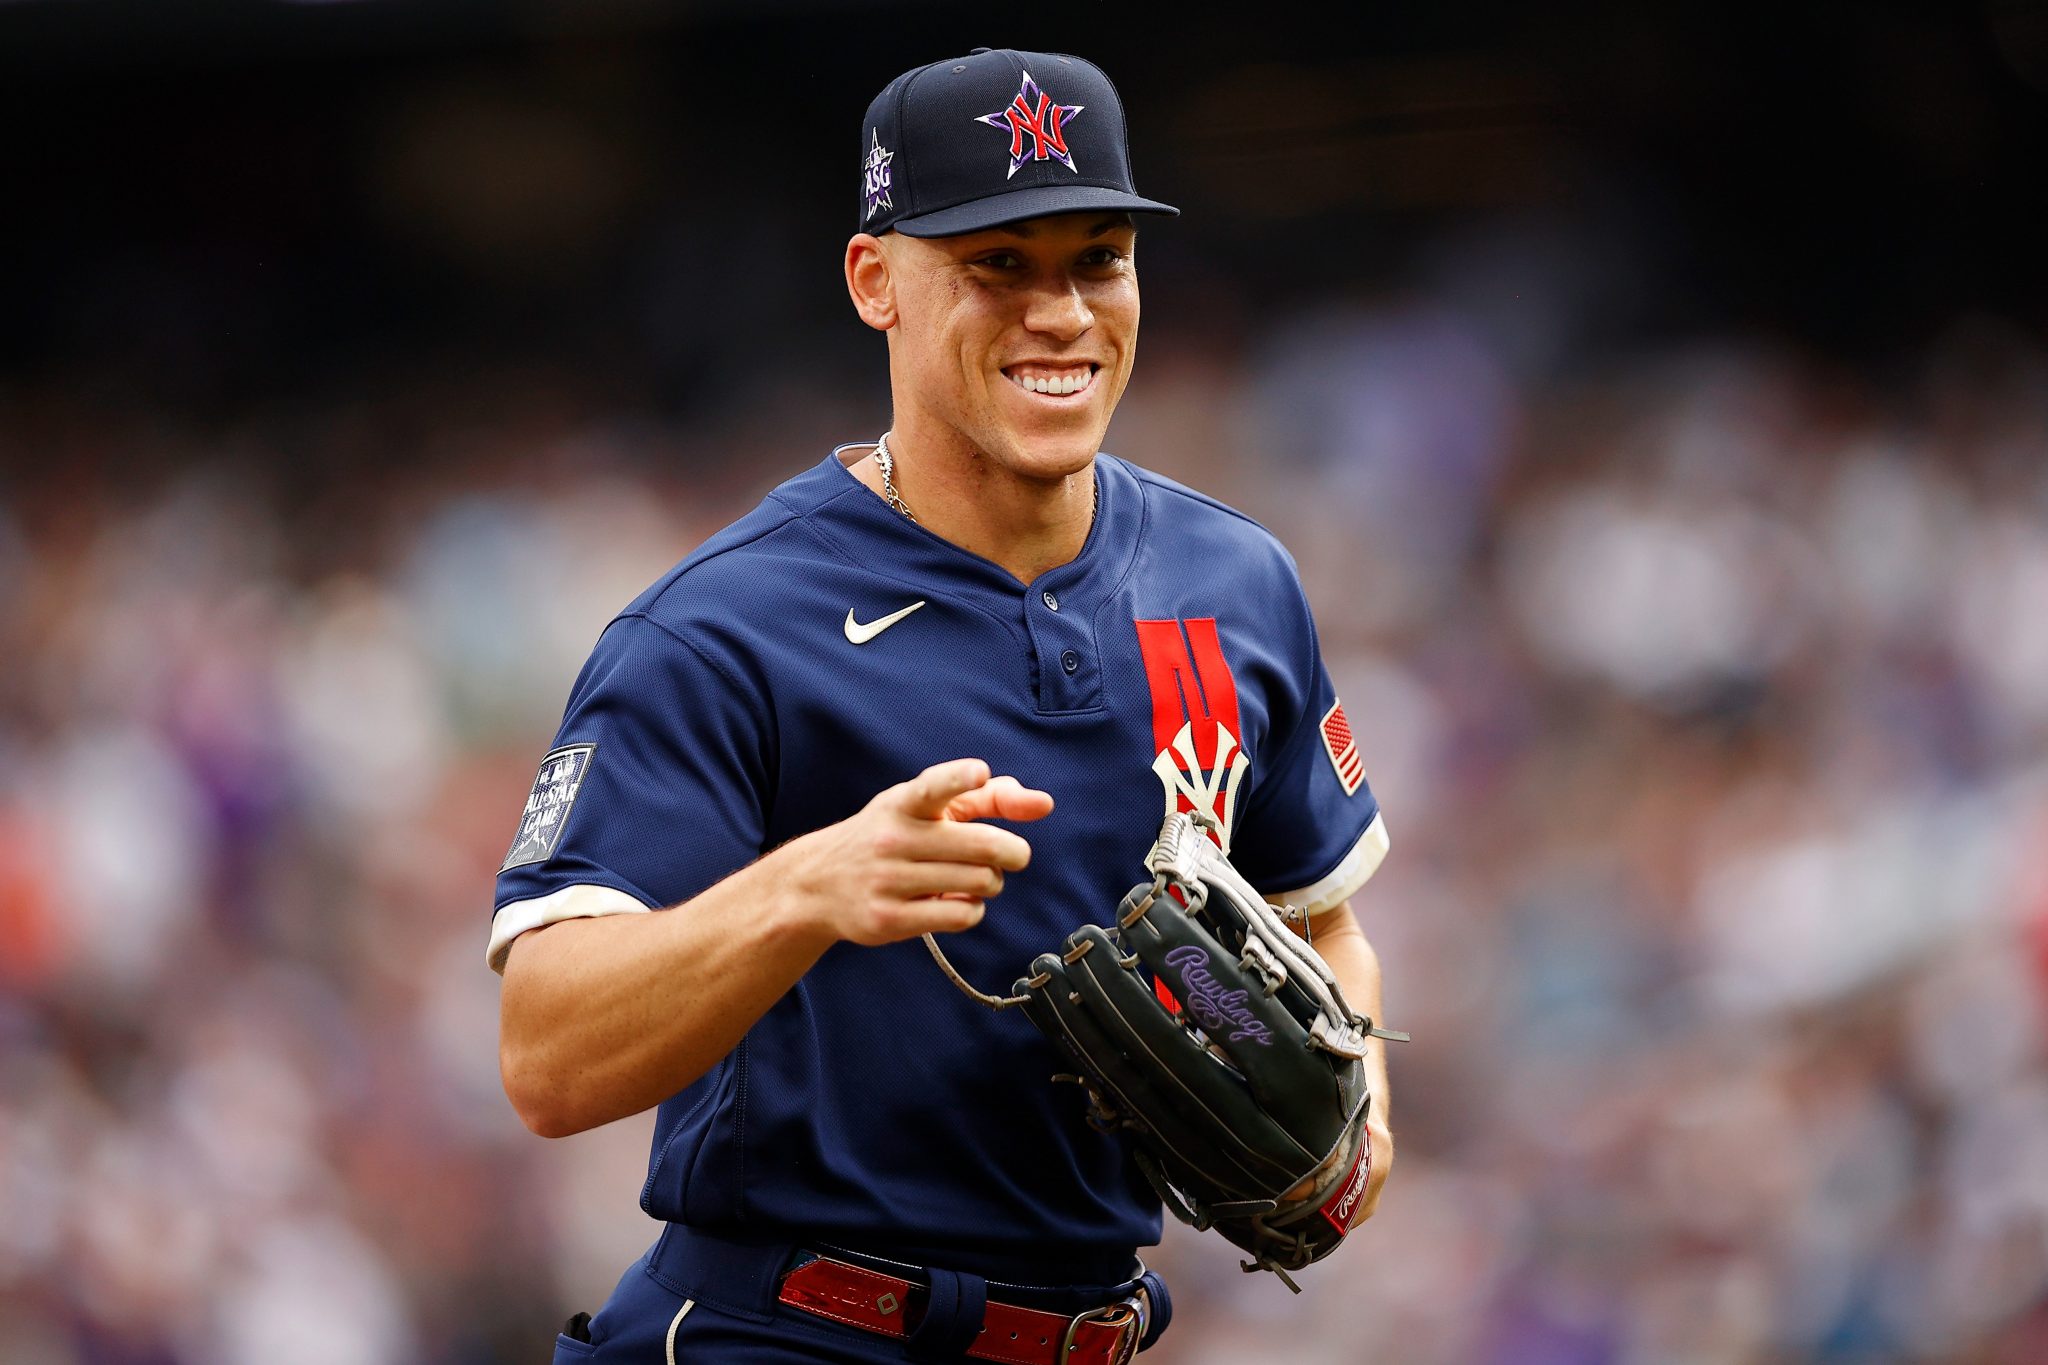 Aaron Judge Salary, Contract and Net Worth 2021